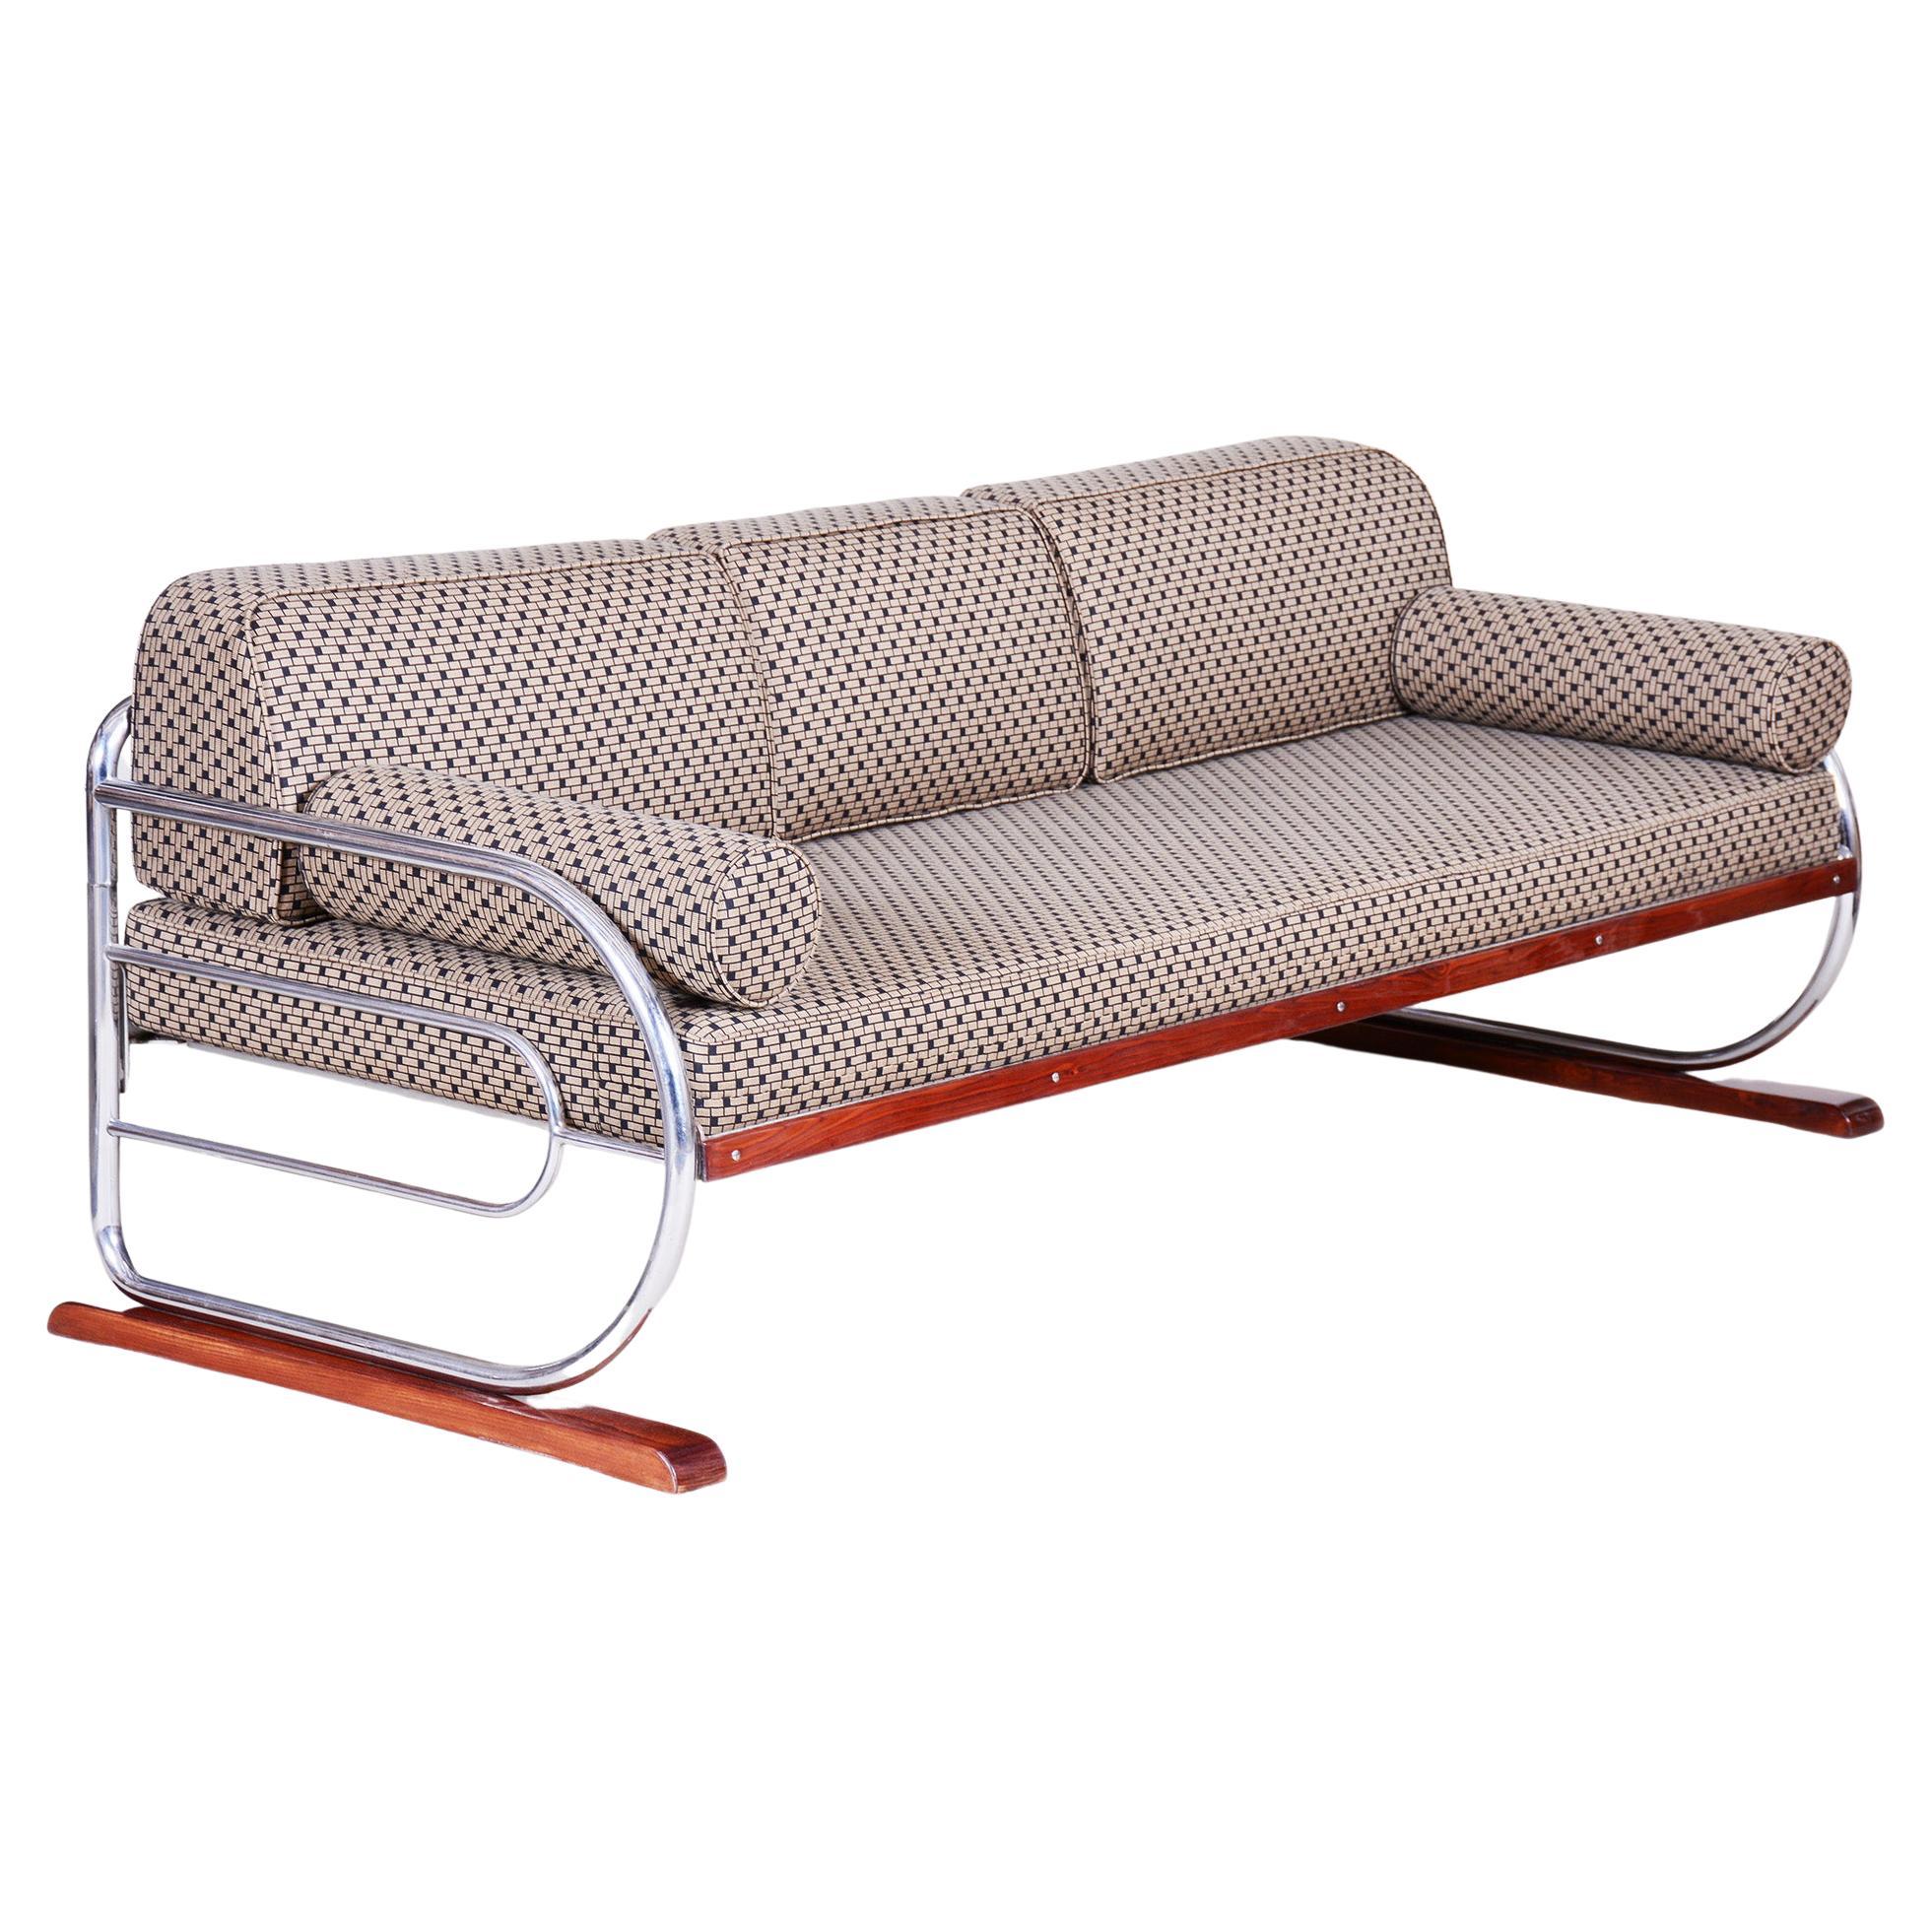 Grey Bauhaus Sofa Made in 1930s Czechia by Robert Slezak, Designed by  Thonet For Sale at 1stDibs